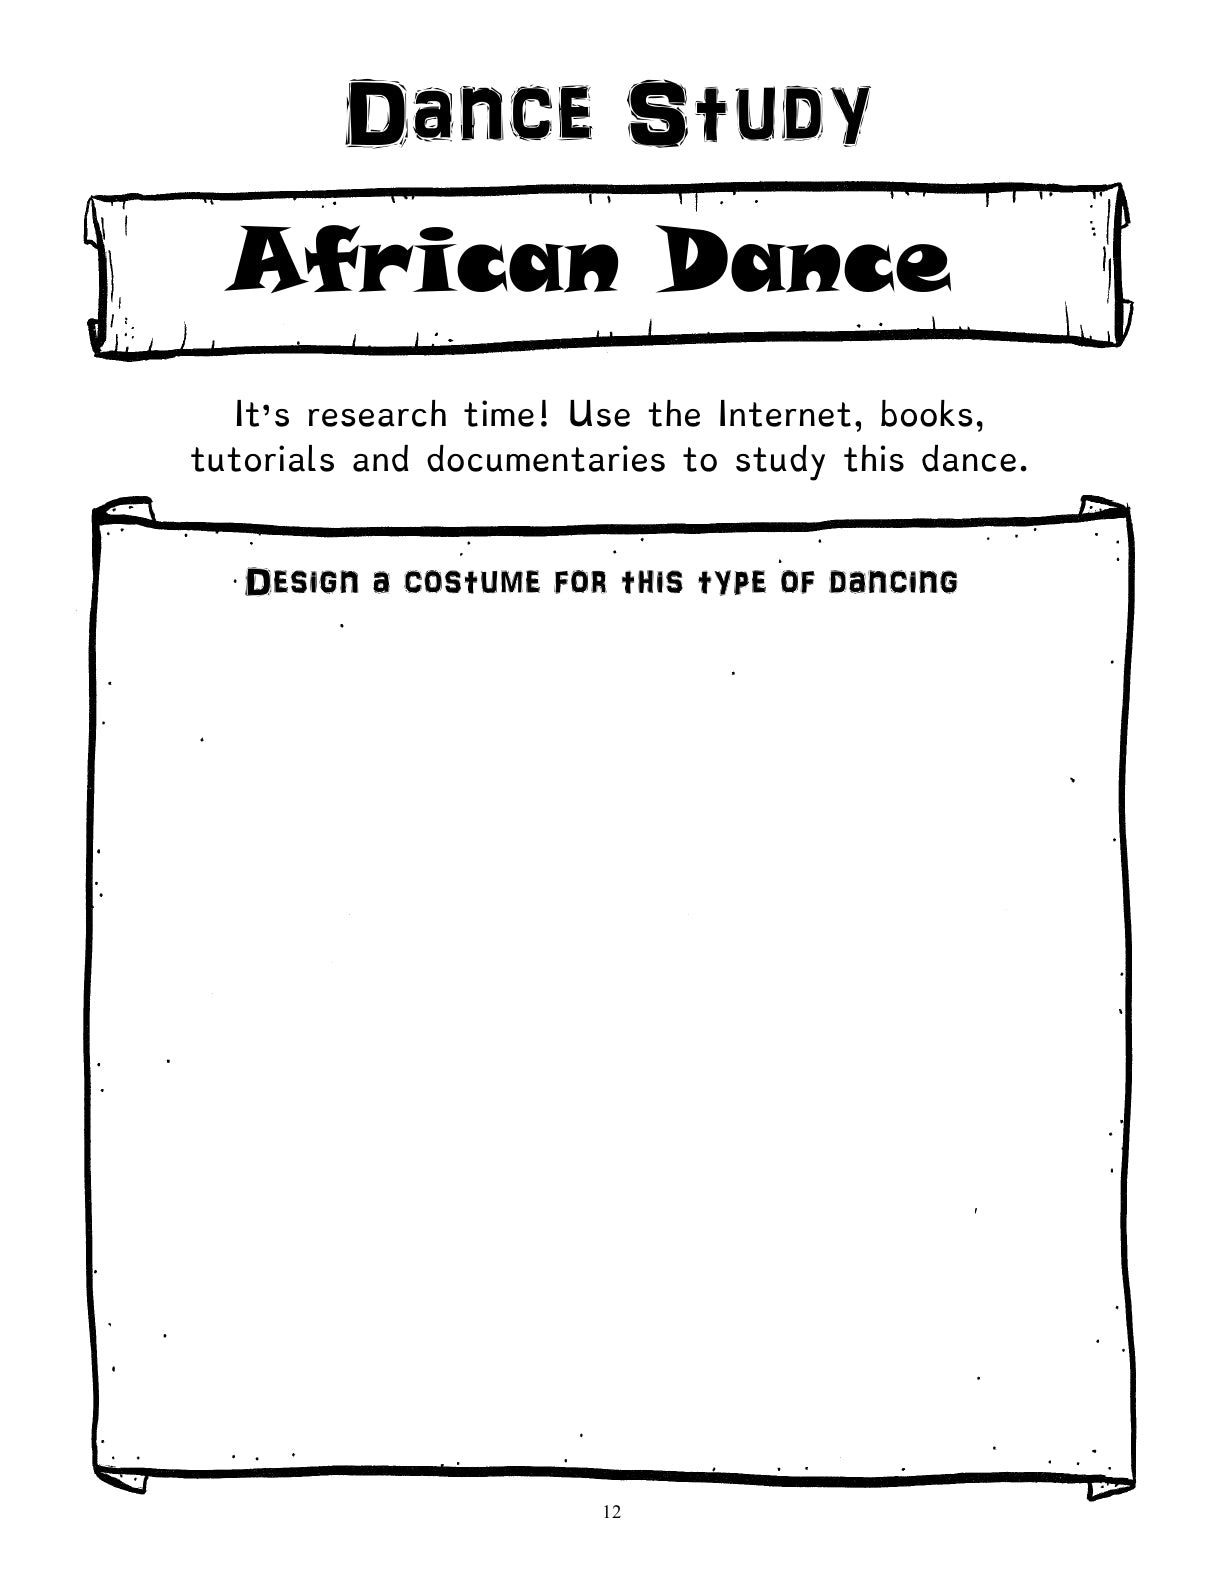 (Age 11+) Book of Dance